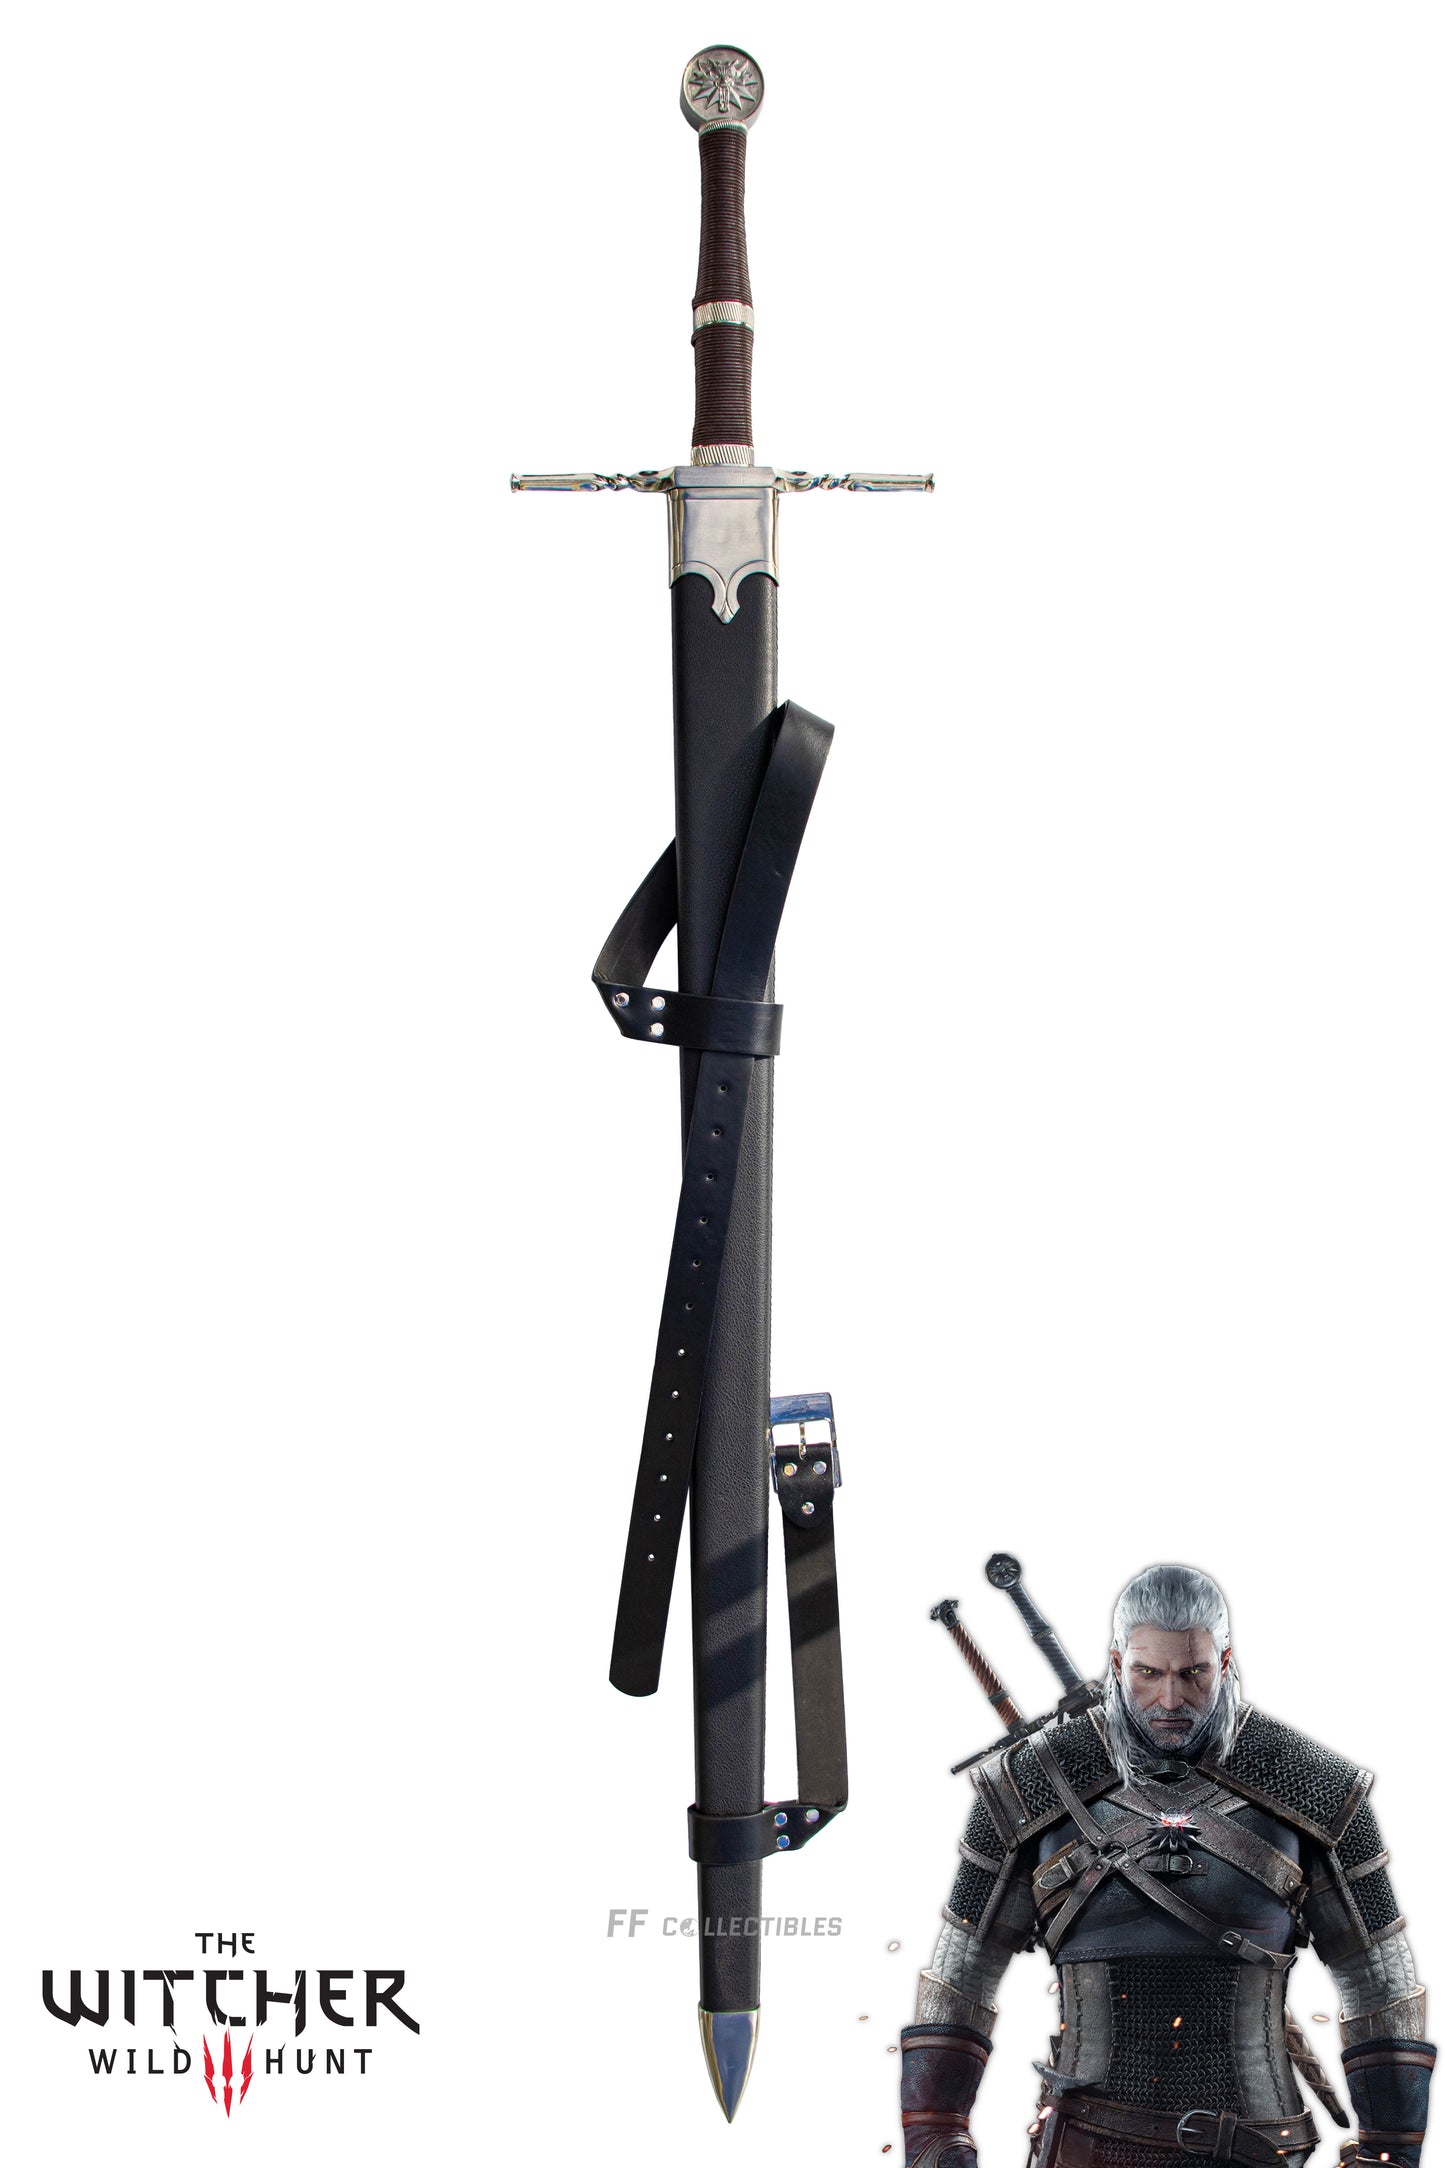 THE WITCHER - GERALT OF RIVIA'S SUPERIOR WOLVEN STEEL SWORD